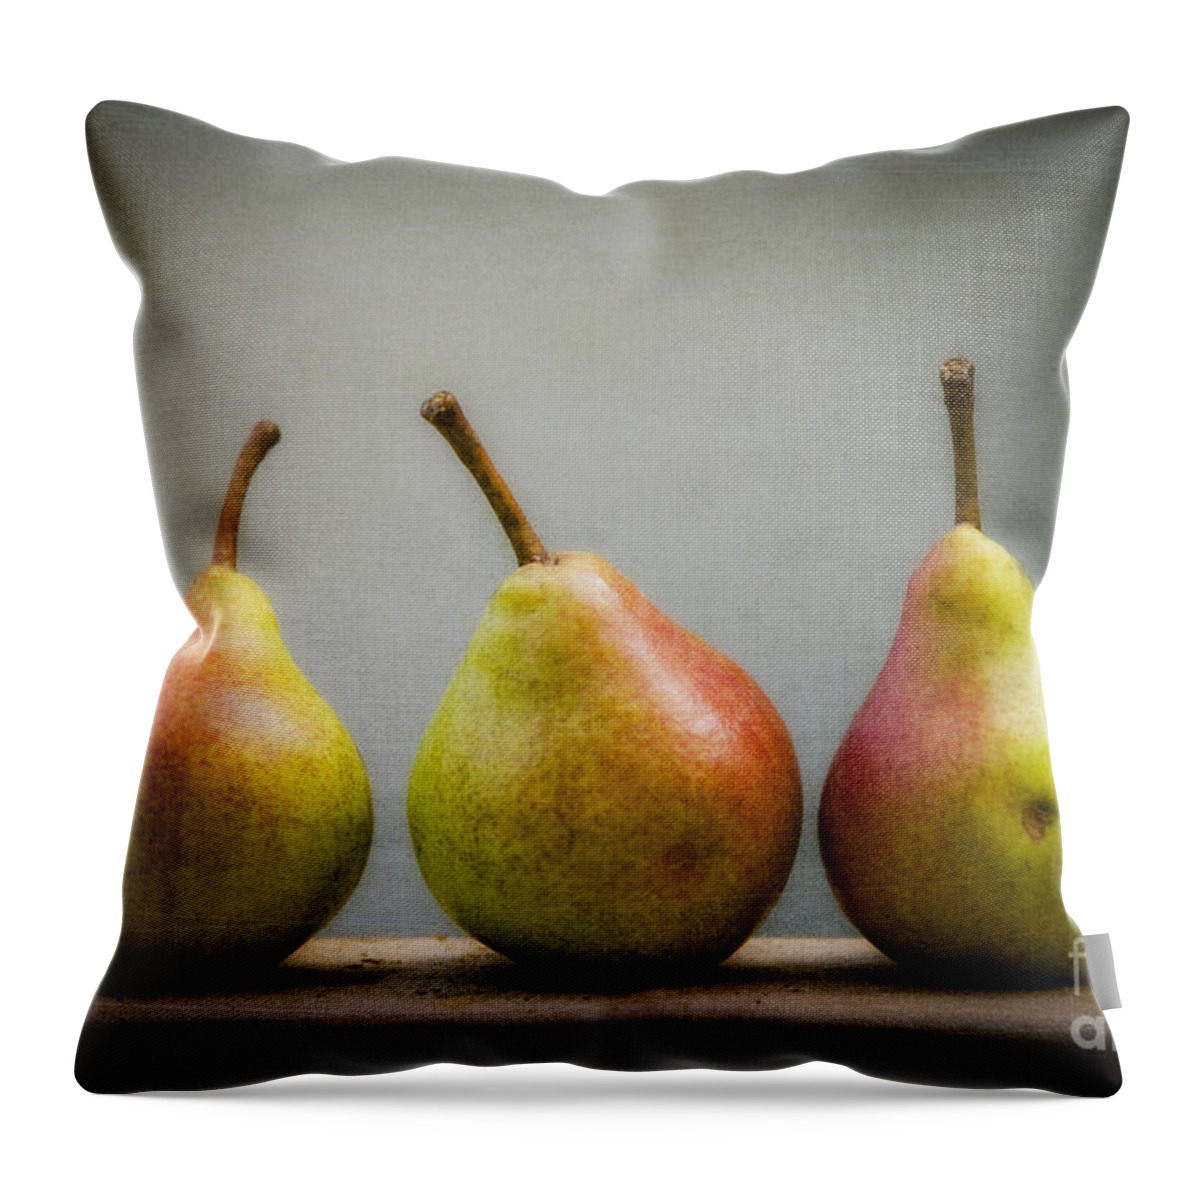 Fruit Throw Pillow featuring the photograph Three Pears  by Alana Ranney